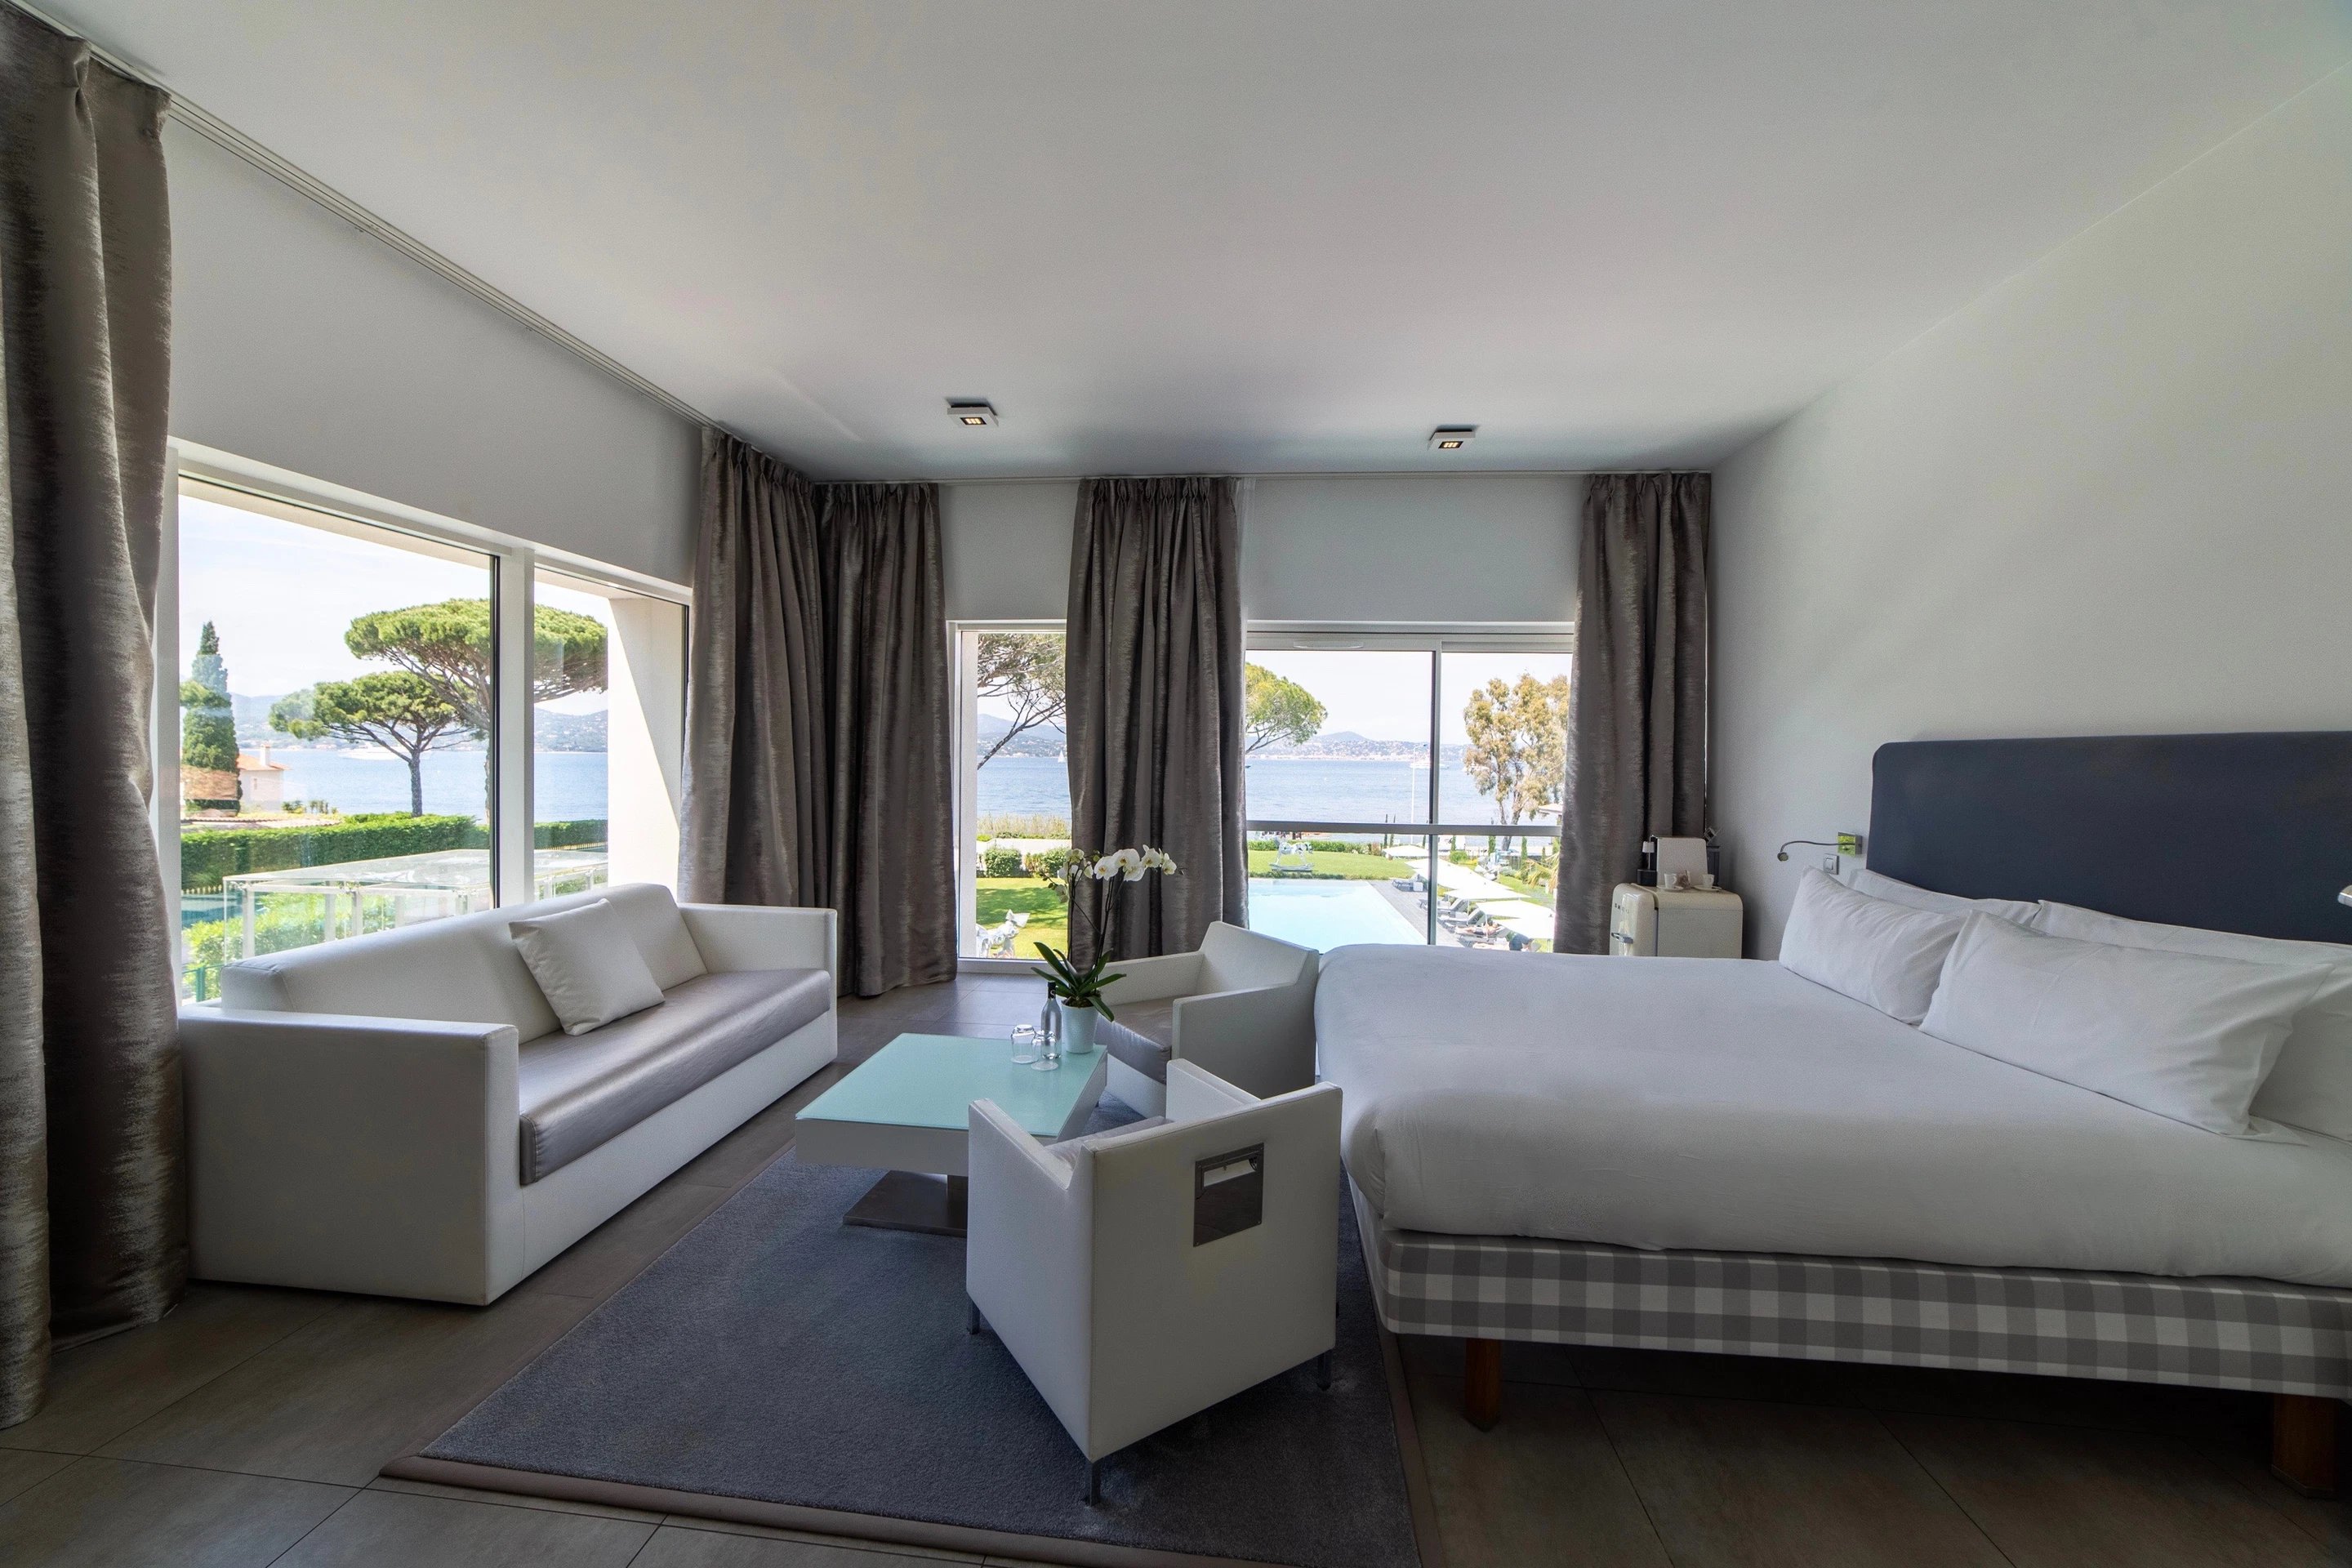 WHITE Rooms & Suites - Kube Hotel Saint-Tropez - South of France